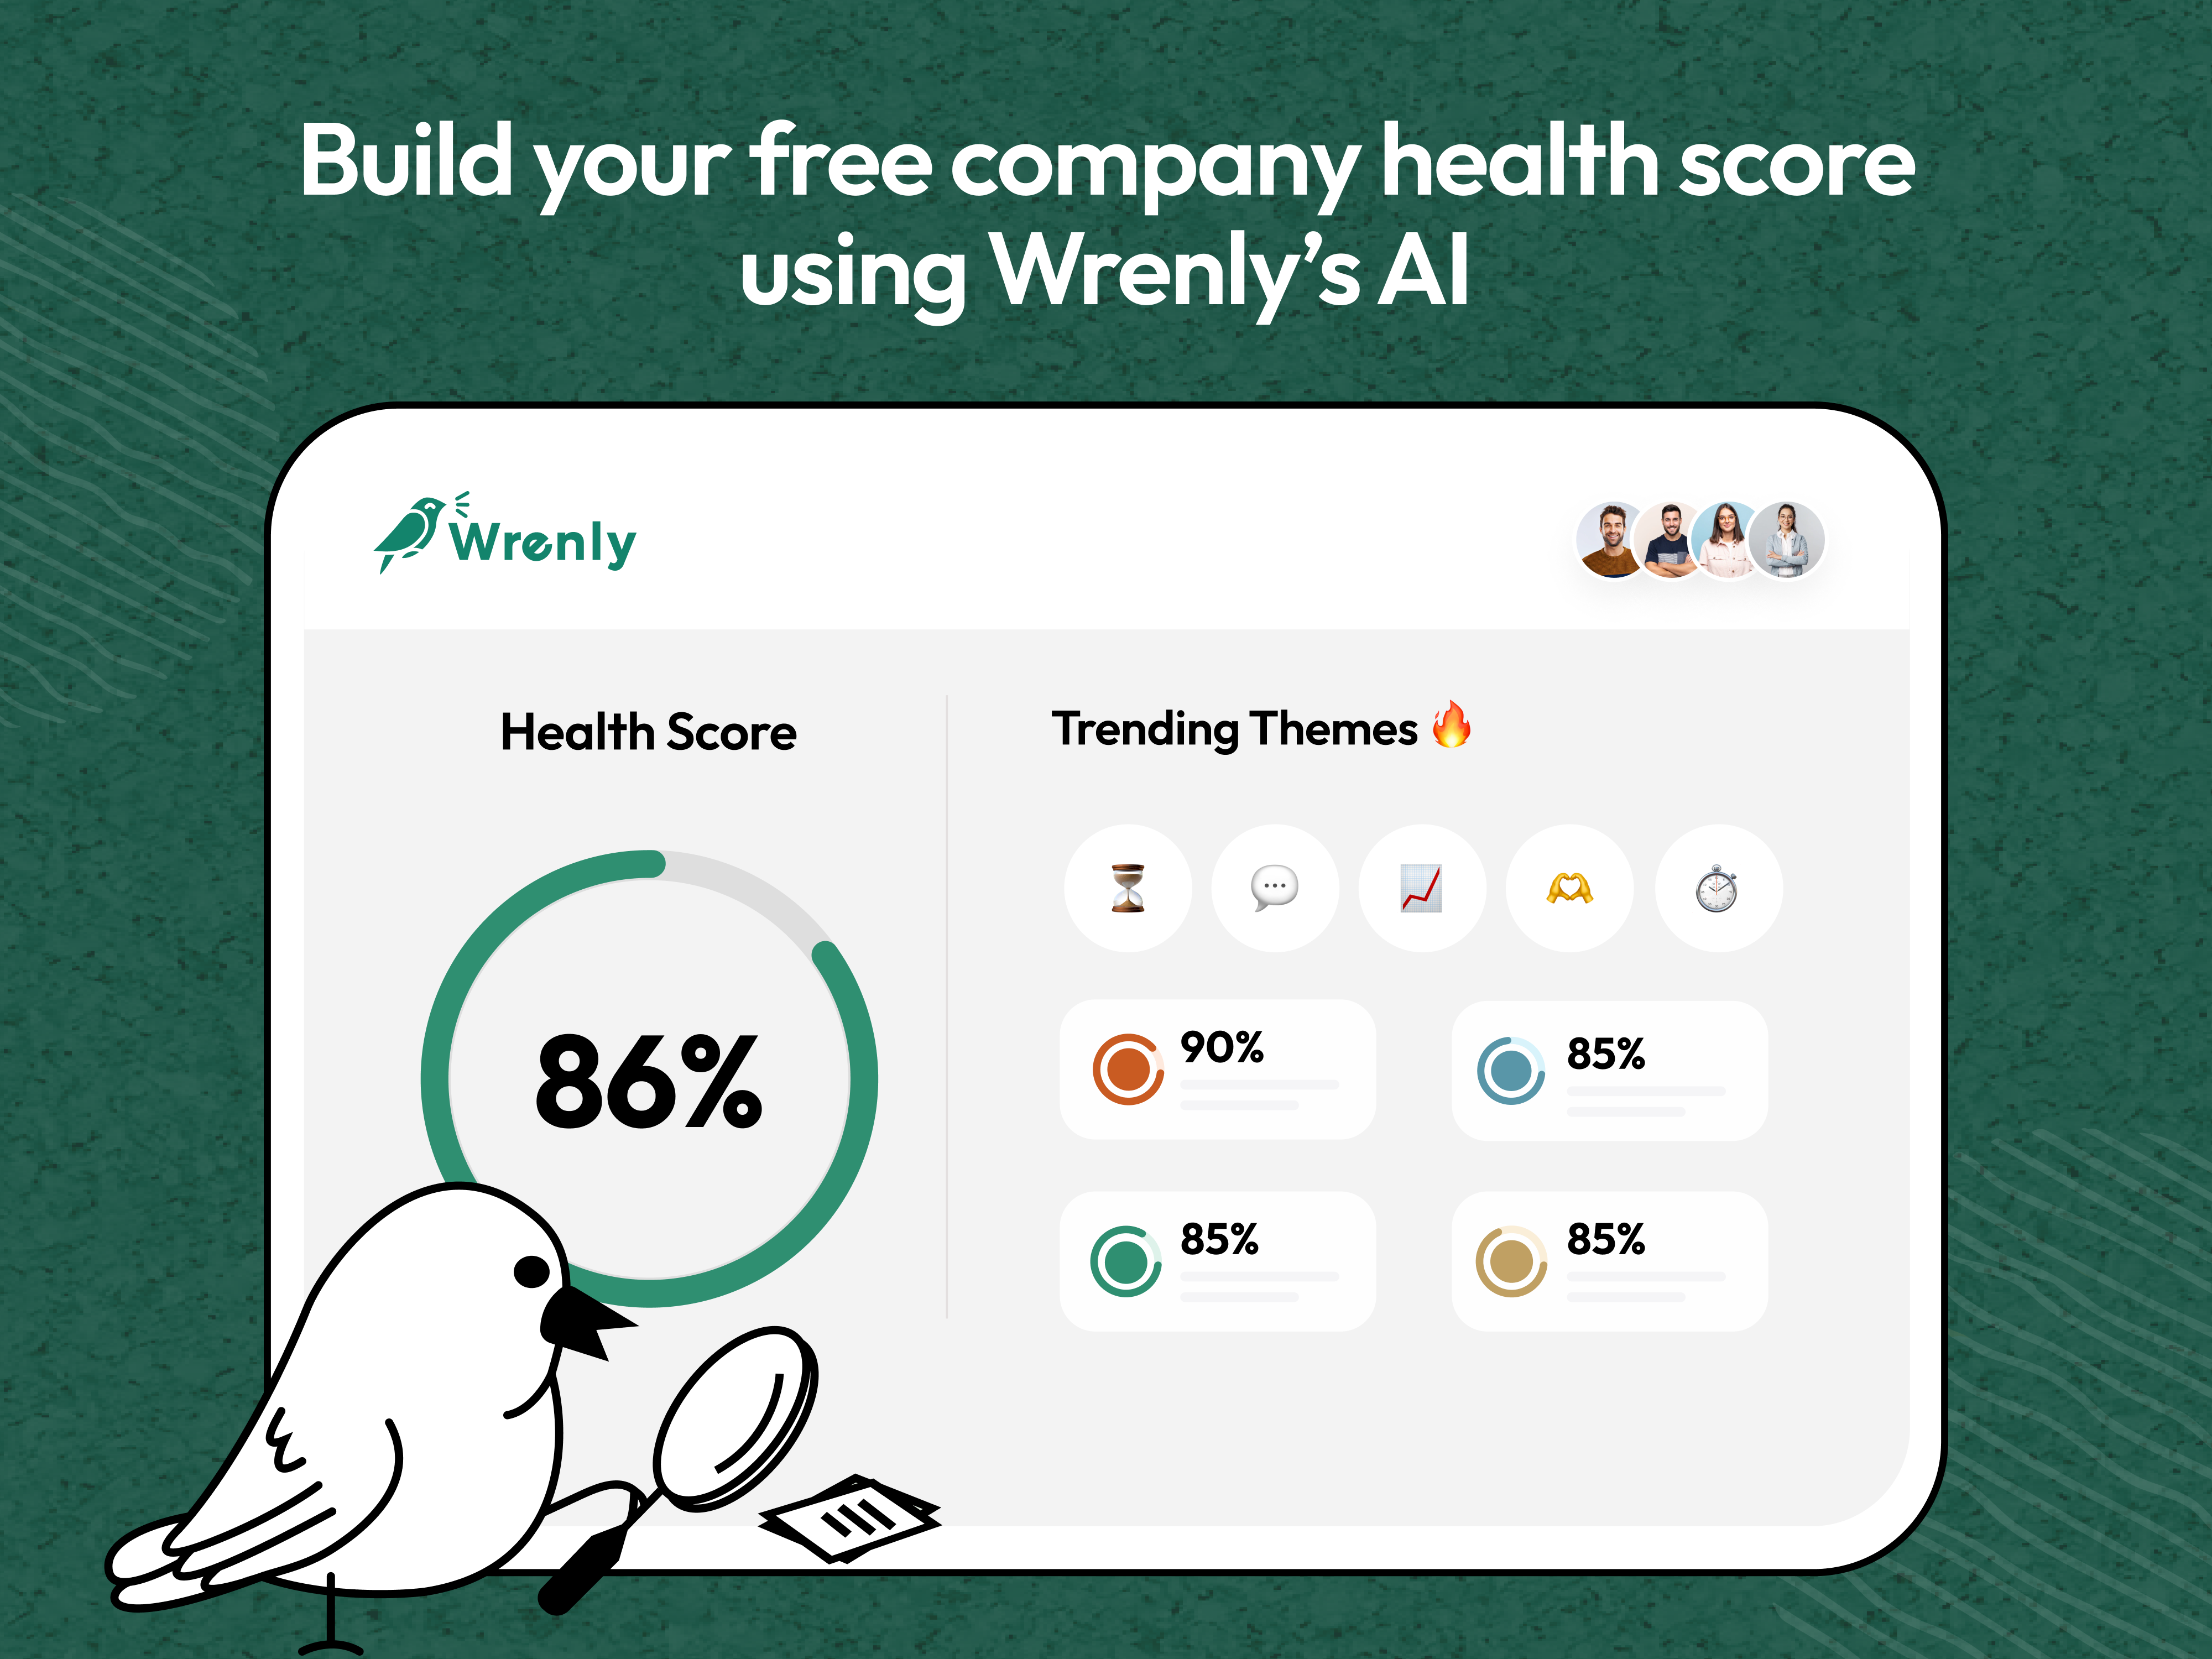 Build your free company health score using Wrenly's AI